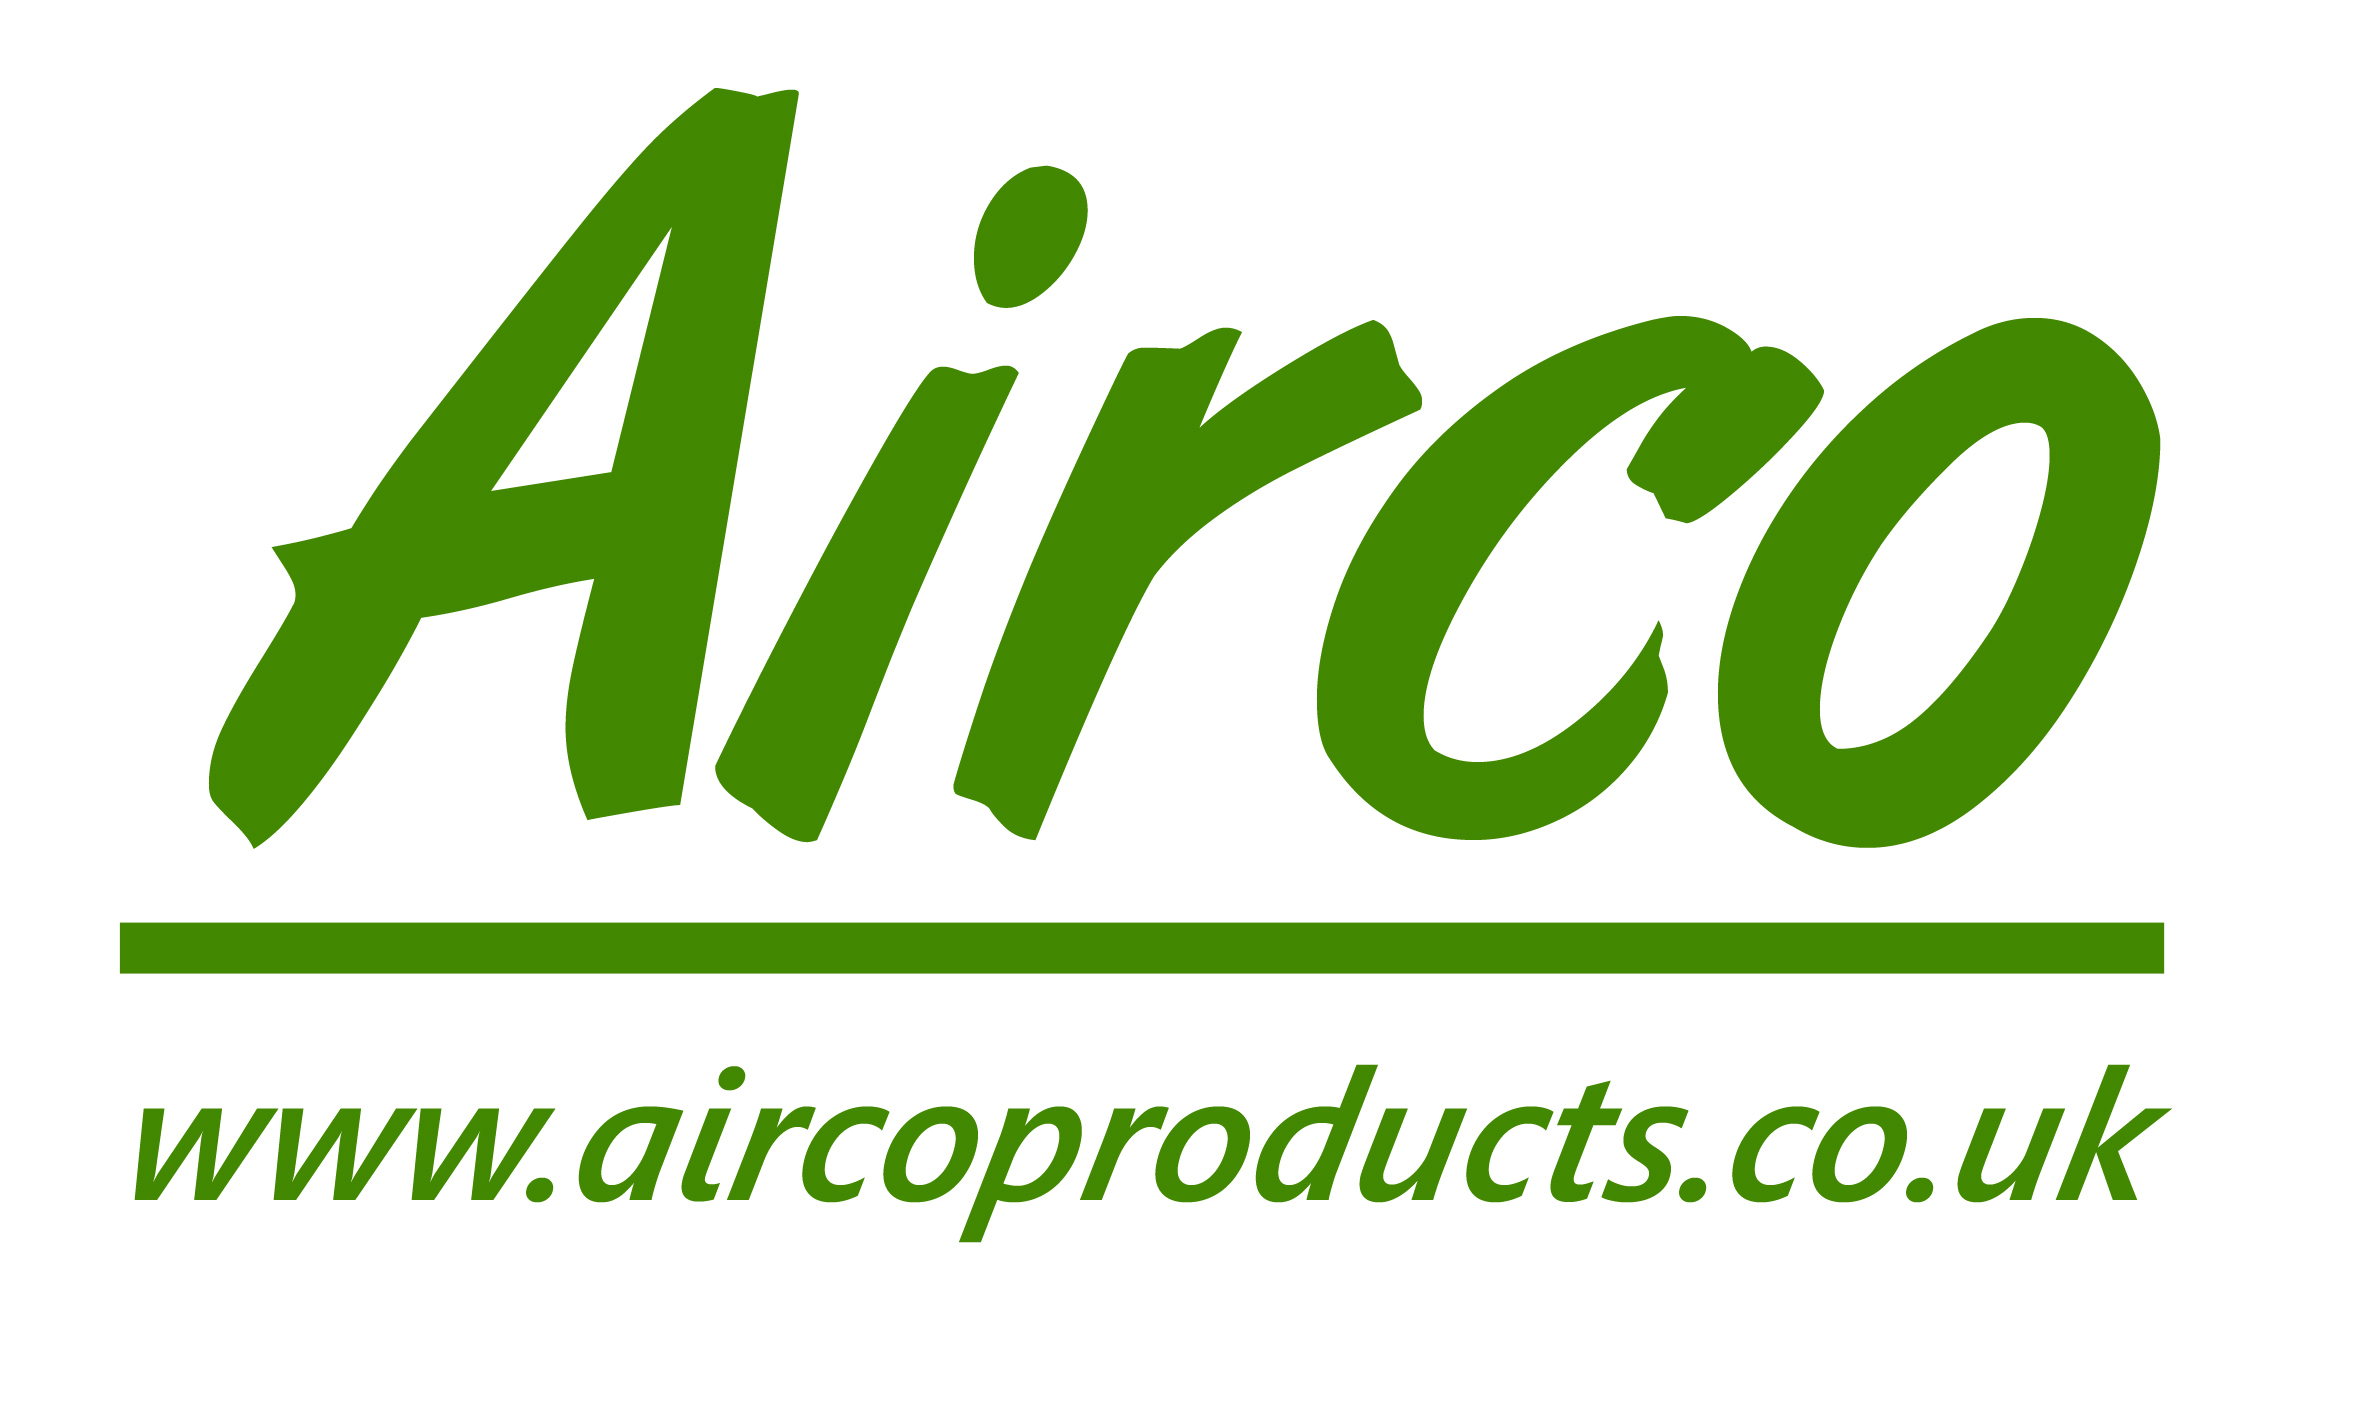 AIRCO PRODUCTS LTD